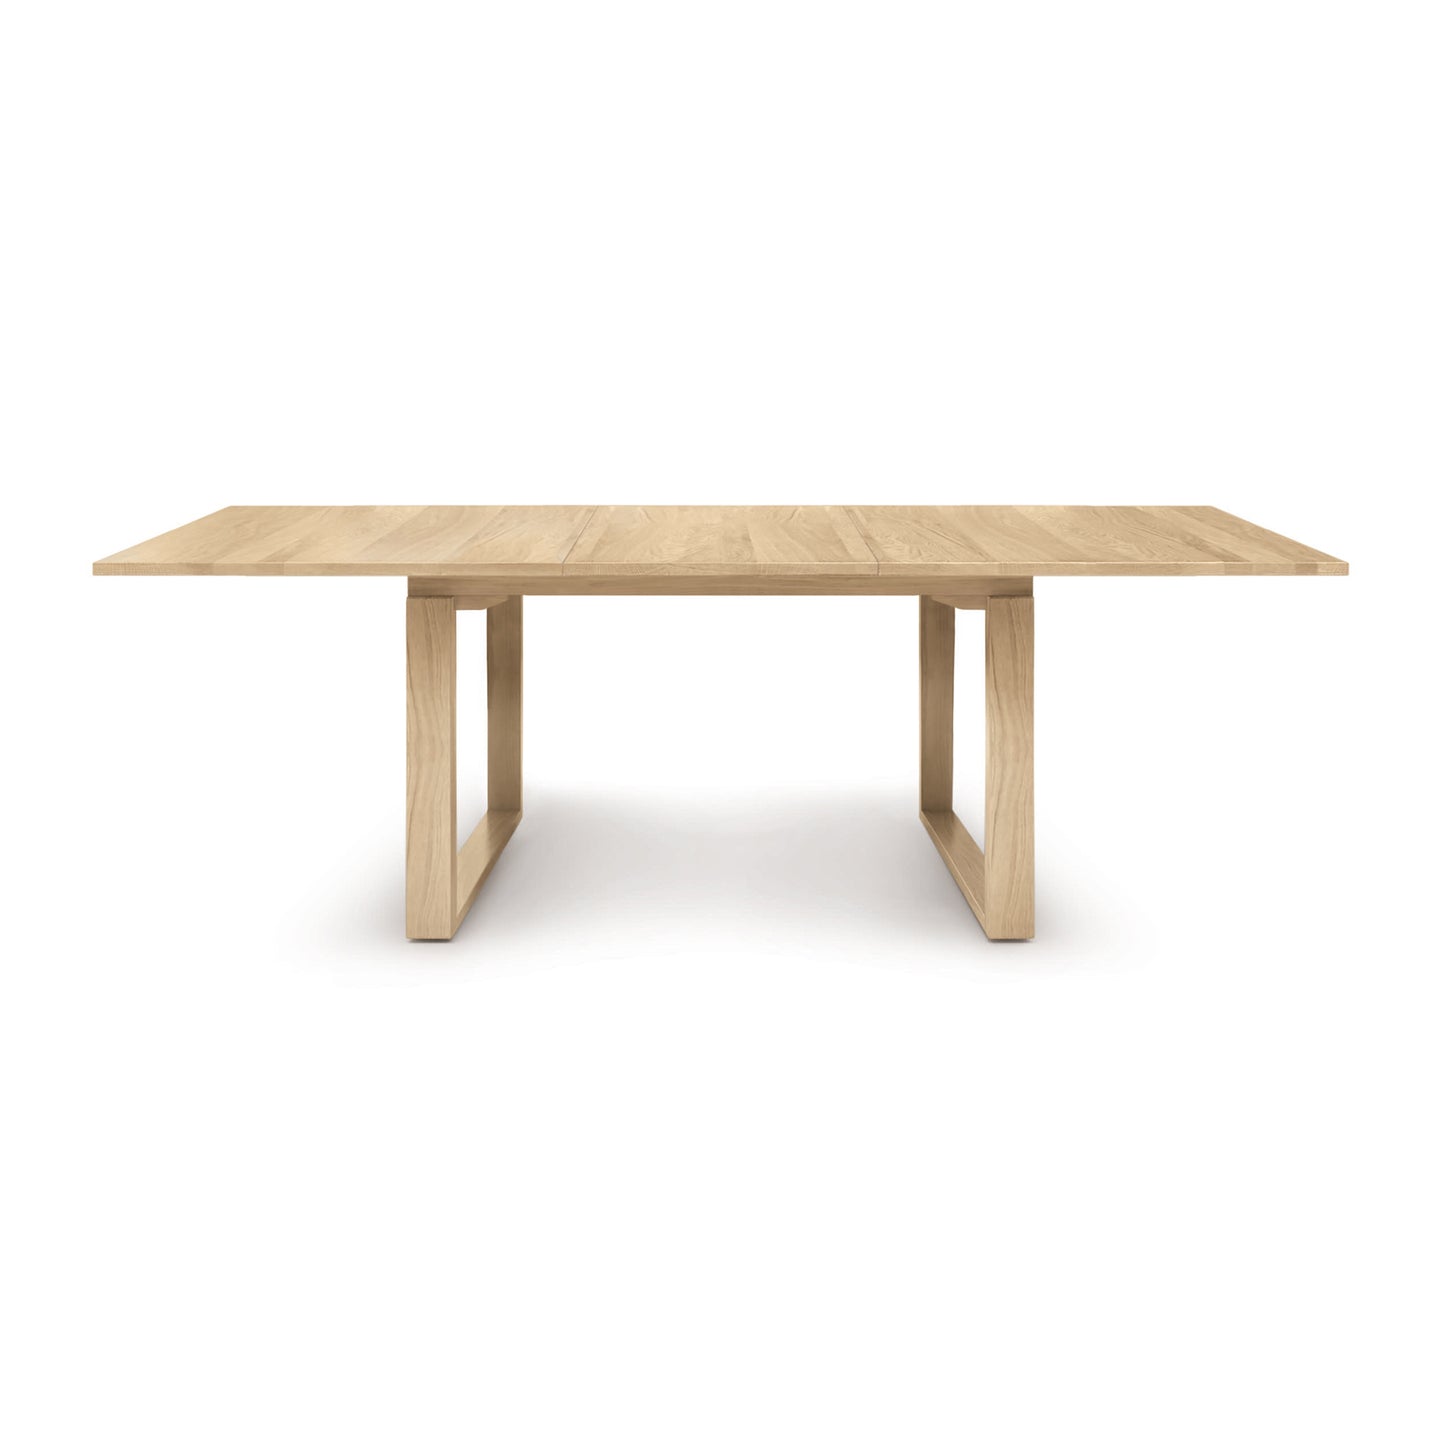 An Iso Extension Dining Table with a solid oak wood base by Copeland Furniture.